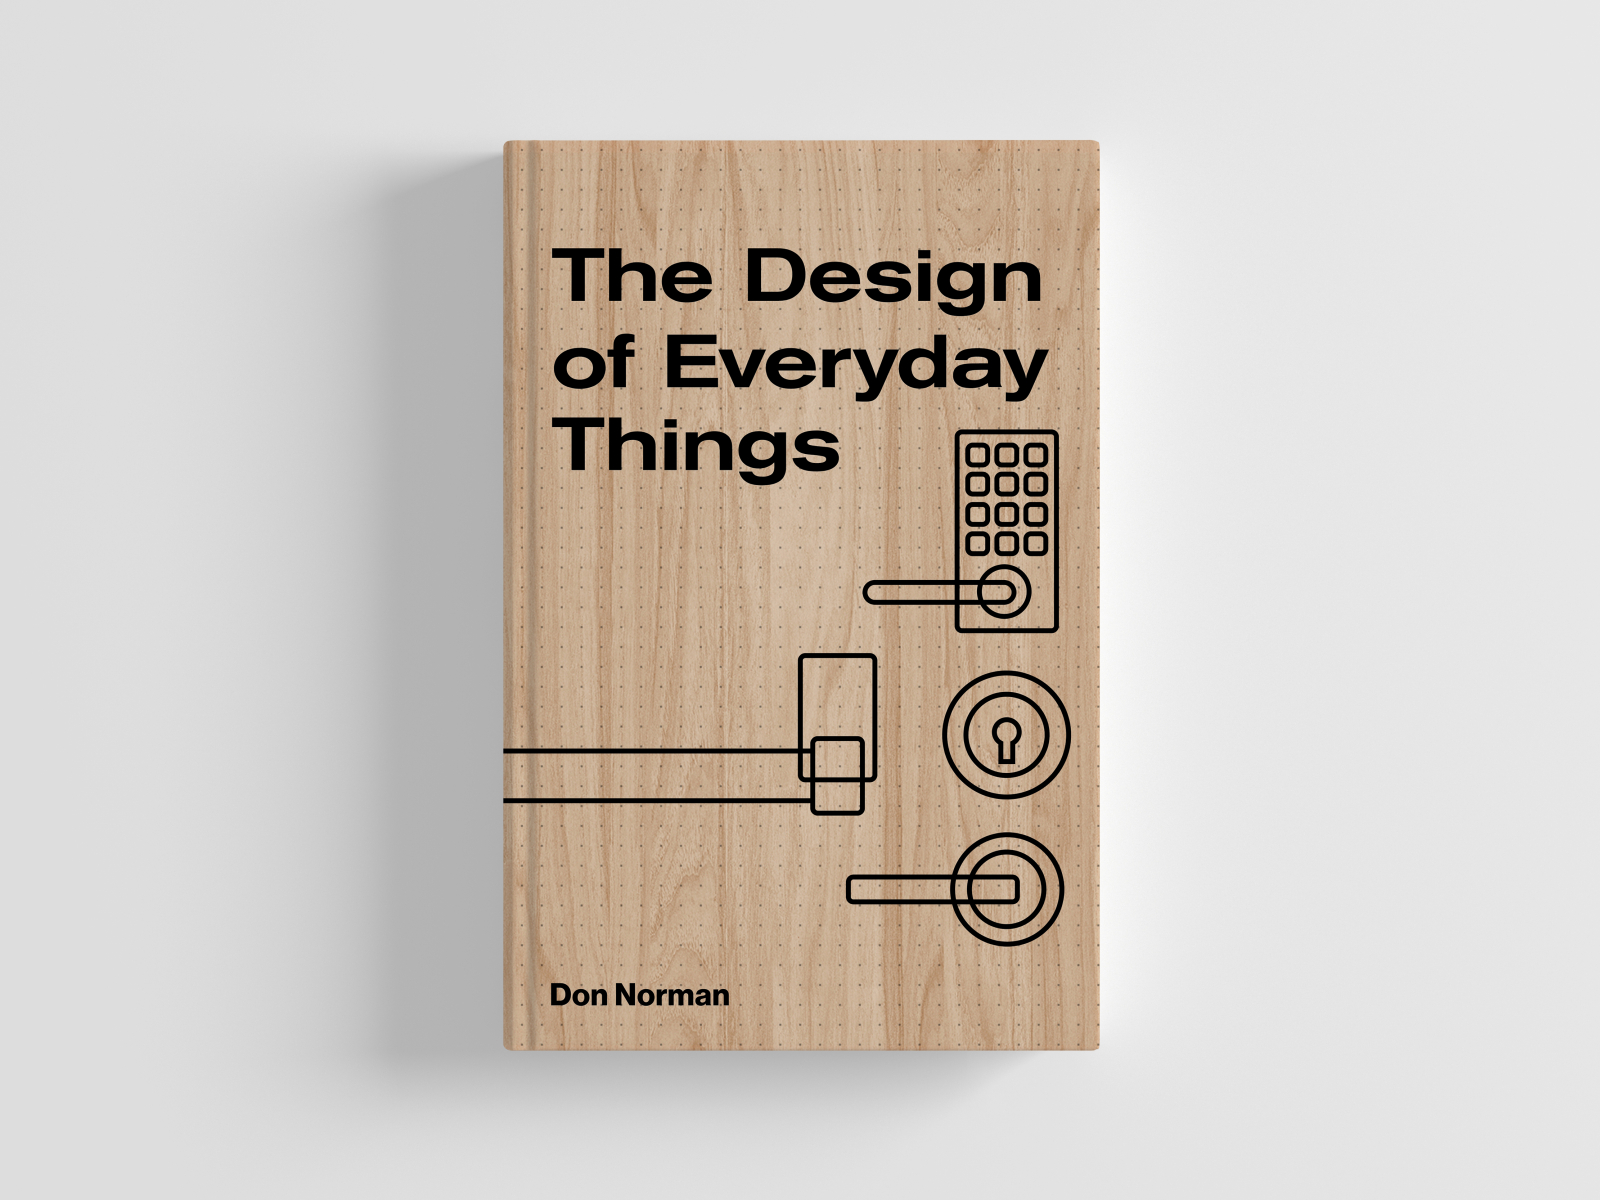 RE:IMAGINED BOOK COVER DESIGN | The Design Of Everyday Things